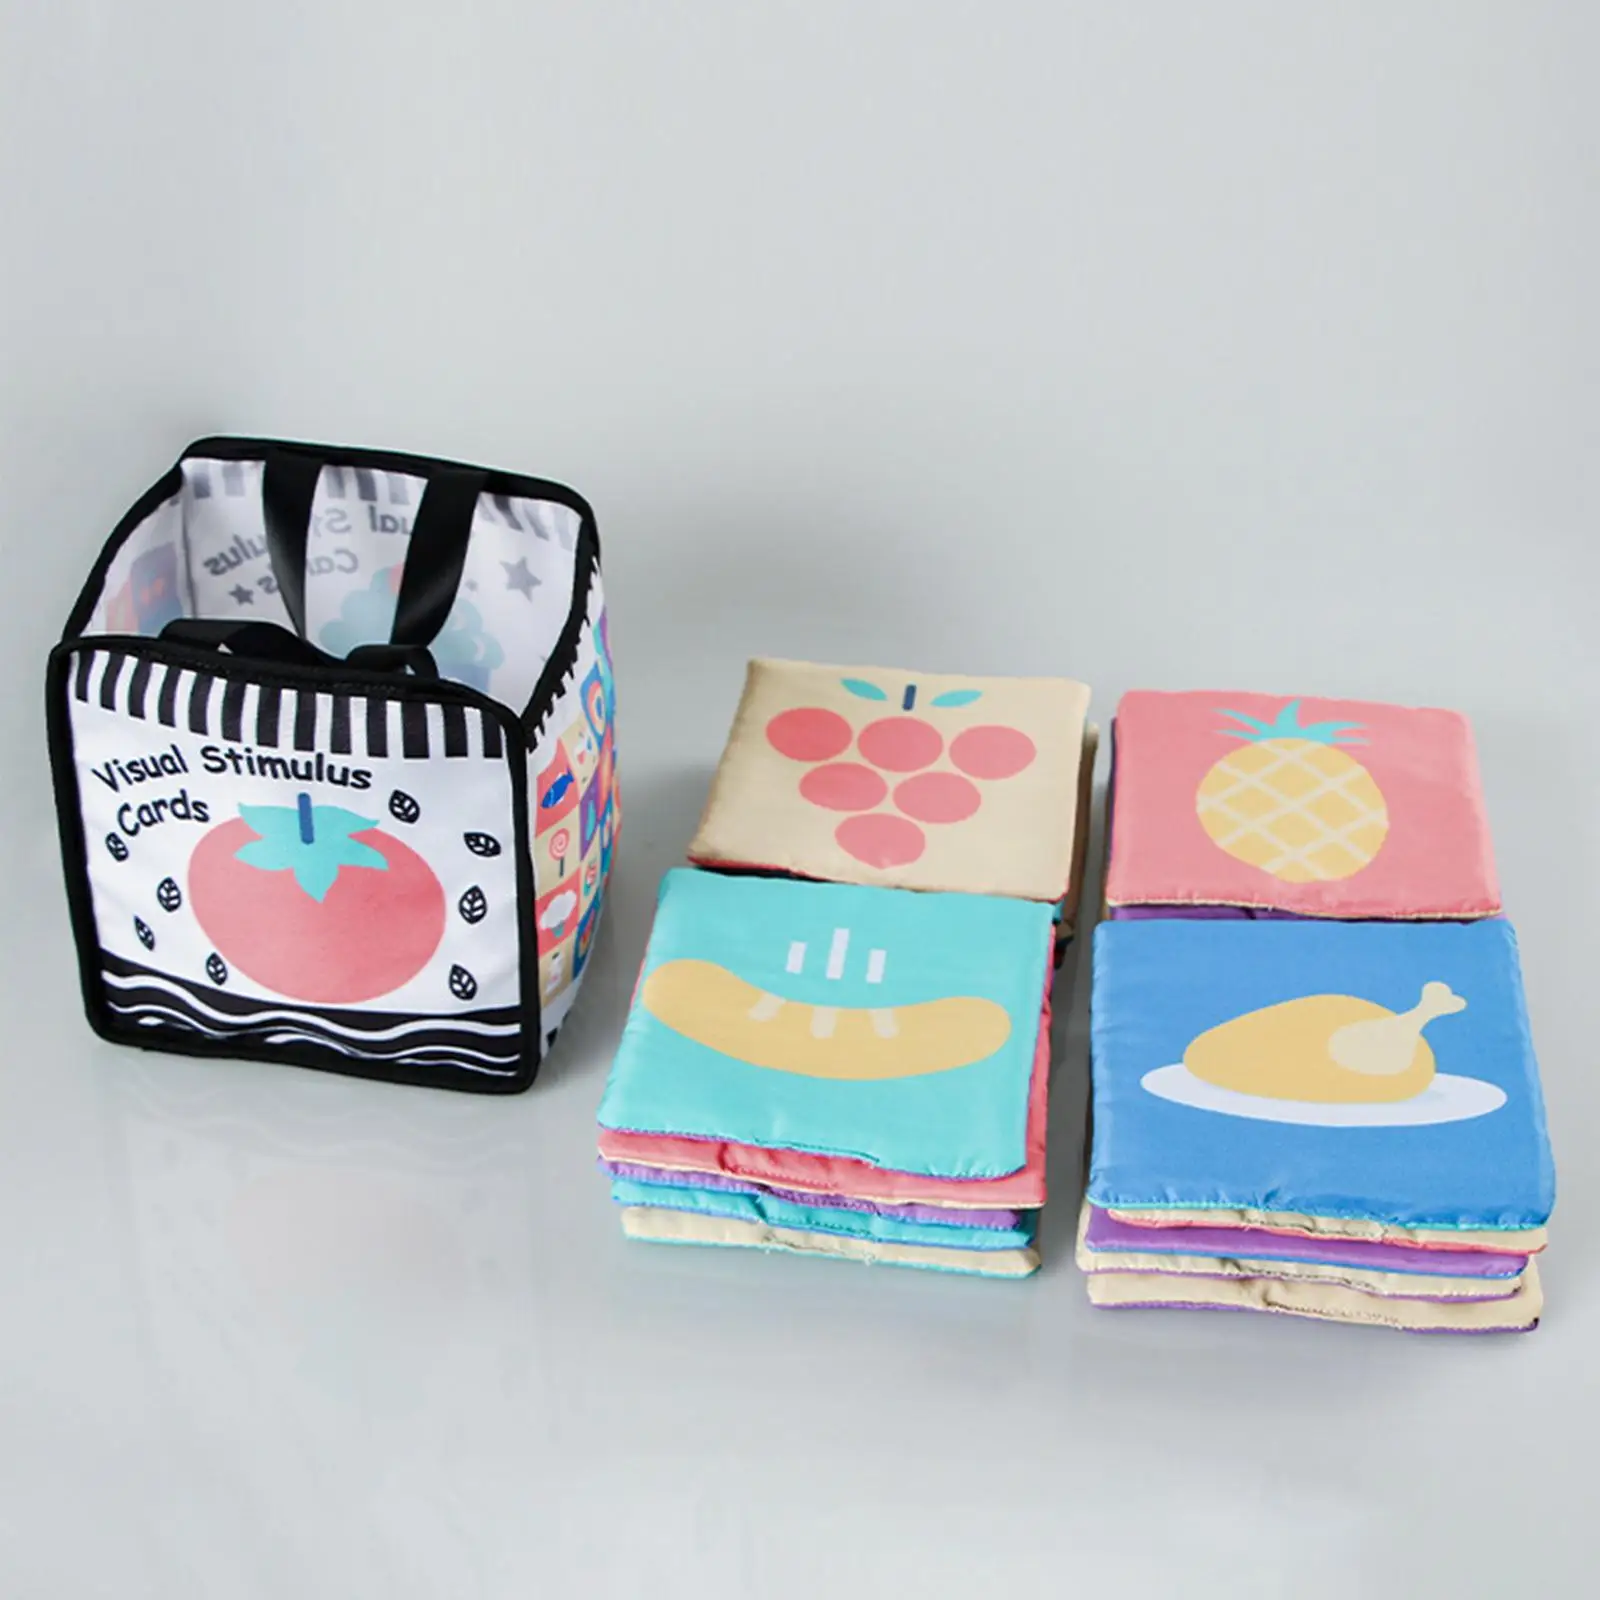 Soft Flash Cards Toys Learning with Storage Bag for Travel Outdoor Toddlers